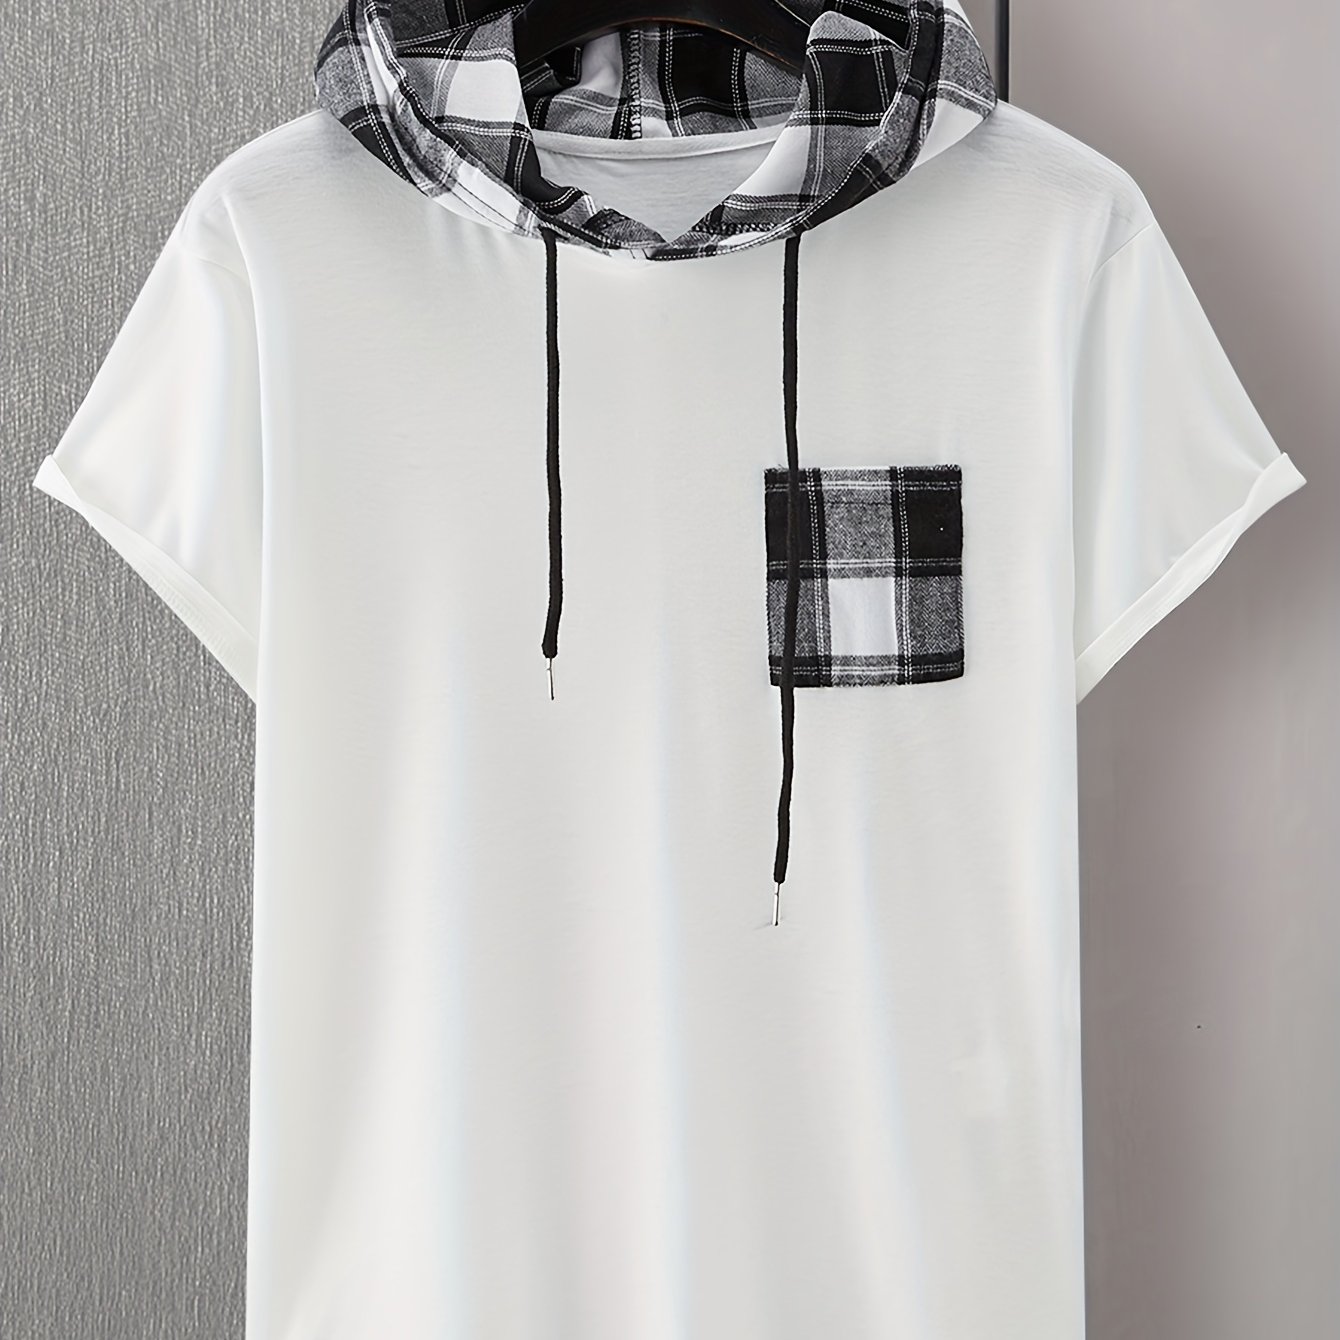 Plaid Drawstring Short Sleeve Hoodie, Men's Casual Stretch Hooded T-shirt  For Spring Summer